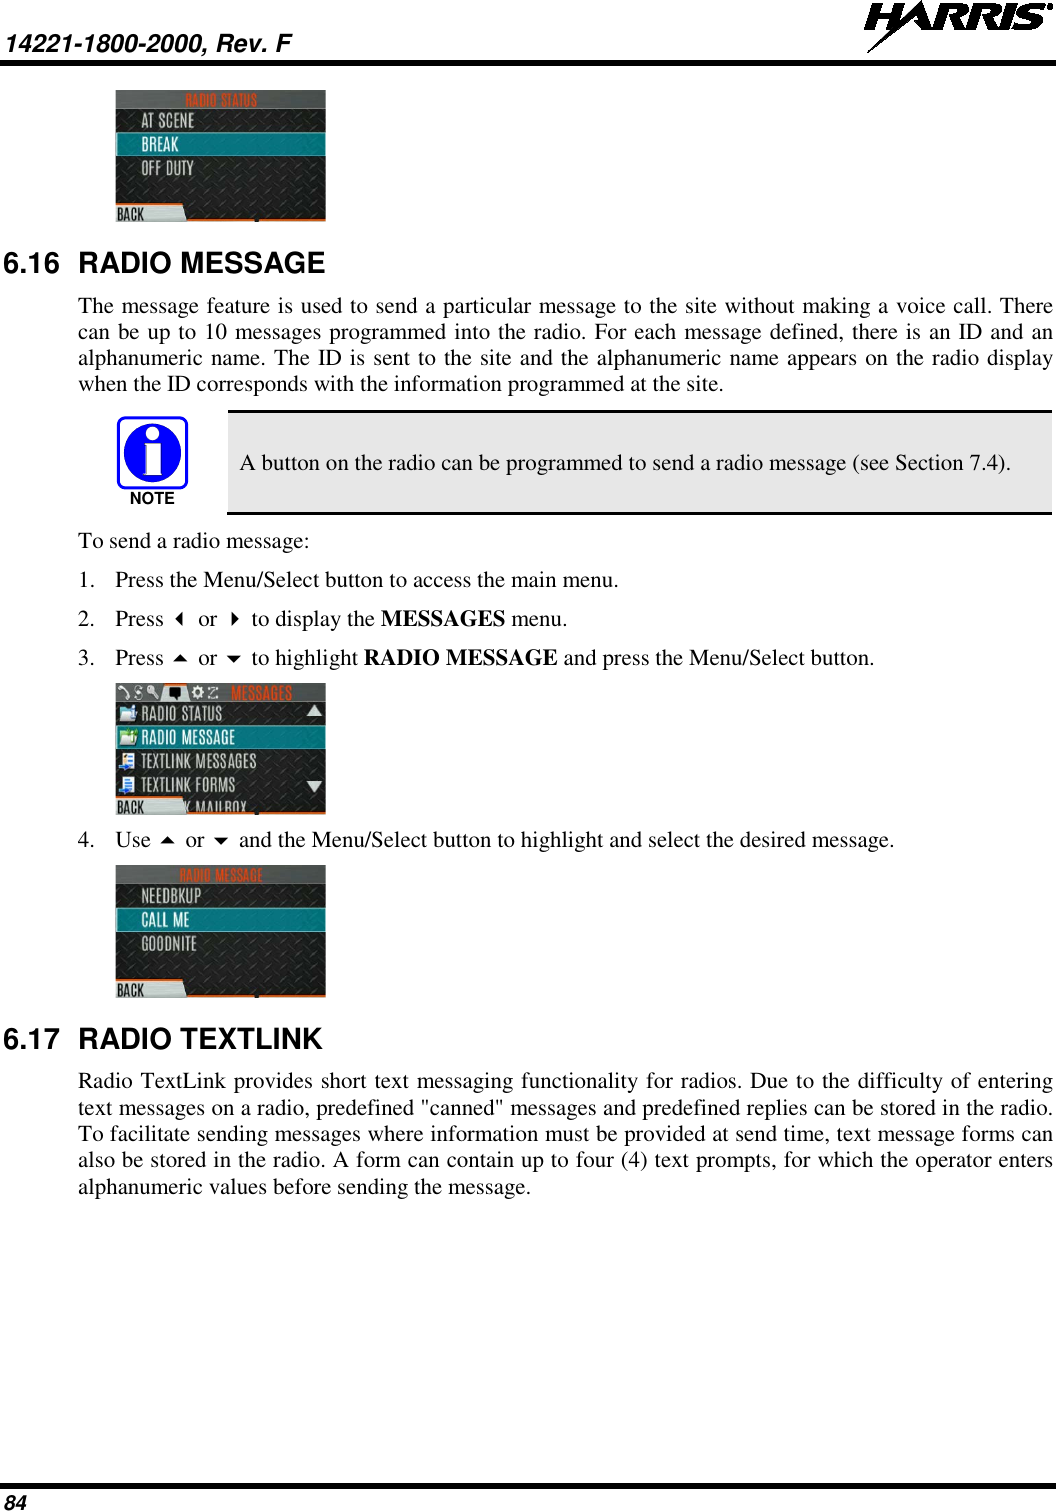 14221-1800-2000, Rev. F   84  6.16 RADIO MESSAGE The message feature is used to send a particular message to the site without making a voice call. There can be up to 10 messages programmed into the radio. For each message defined, there is an ID and an alphanumeric name. The ID is sent to the site and the alphanumeric name appears on the radio display when the ID corresponds with the information programmed at the site.  A button on the radio can be programmed to send a radio message (see Section 7.4). To send a radio message: 1. Press the Menu/Select button to access the main menu. 2. Press  or  to display the MESSAGES menu. 3. Press  or  to highlight RADIO MESSAGE and press the Menu/Select button.  4. Use  or  and the Menu/Select button to highlight and select the desired message.   6.17 RADIO TEXTLINK Radio TextLink provides short text messaging functionality for radios. Due to the difficulty of entering text messages on a radio, predefined &quot;canned&quot; messages and predefined replies can be stored in the radio. To facilitate sending messages where information must be provided at send time, text message forms can also be stored in the radio. A form can contain up to four (4) text prompts, for which the operator enters alphanumeric values before sending the message. NOTE